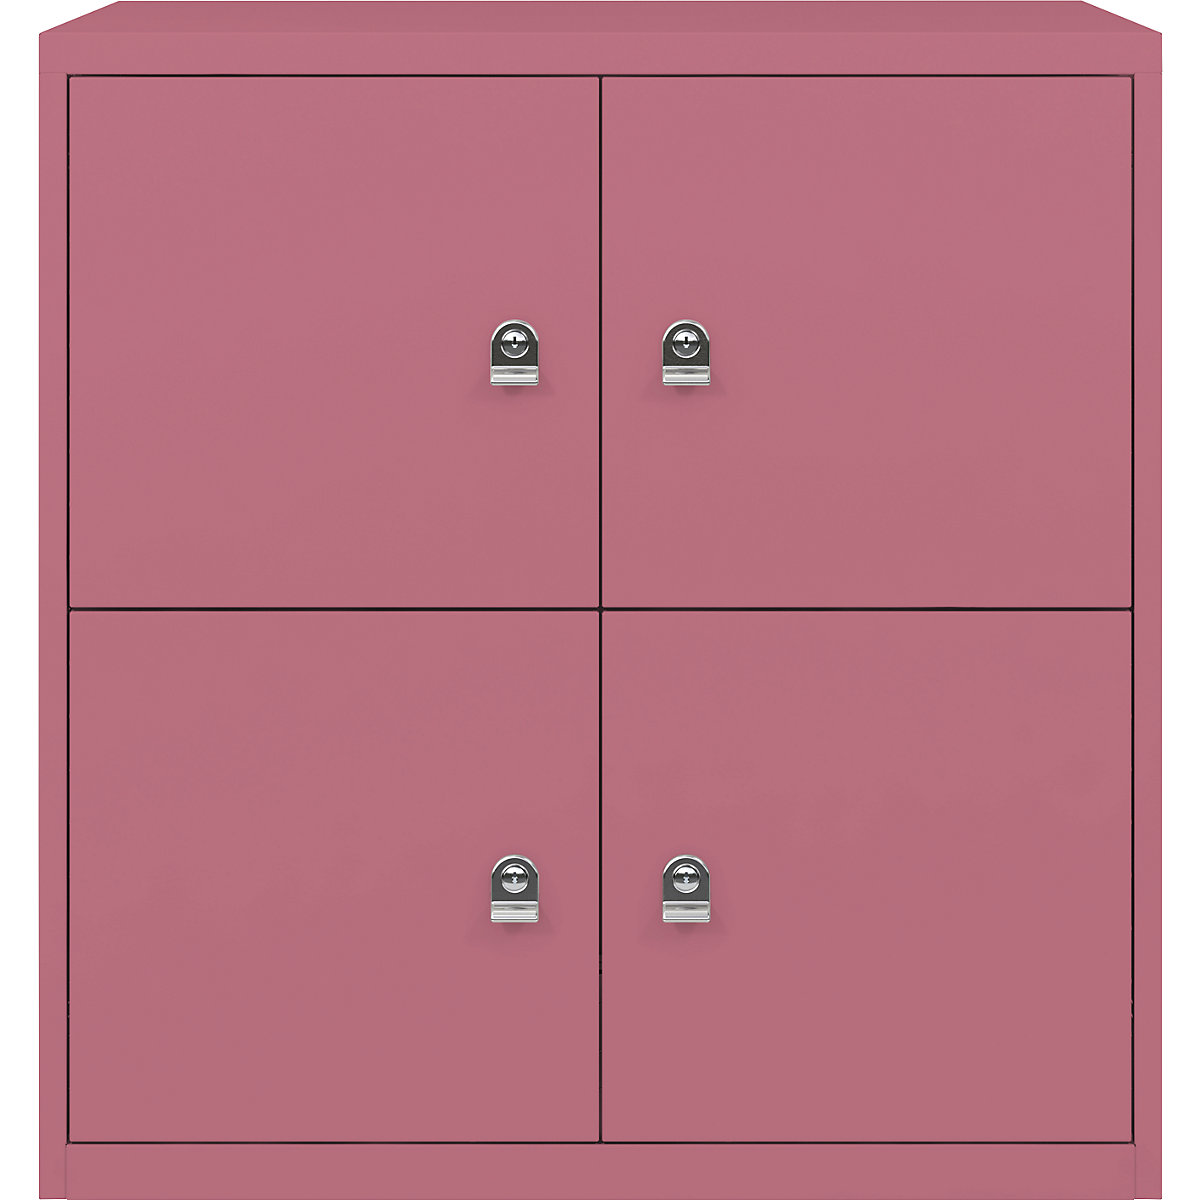 BISLEY – LateralFile™ lodge, with 4 lockable compartments, height 375 mm each, pink